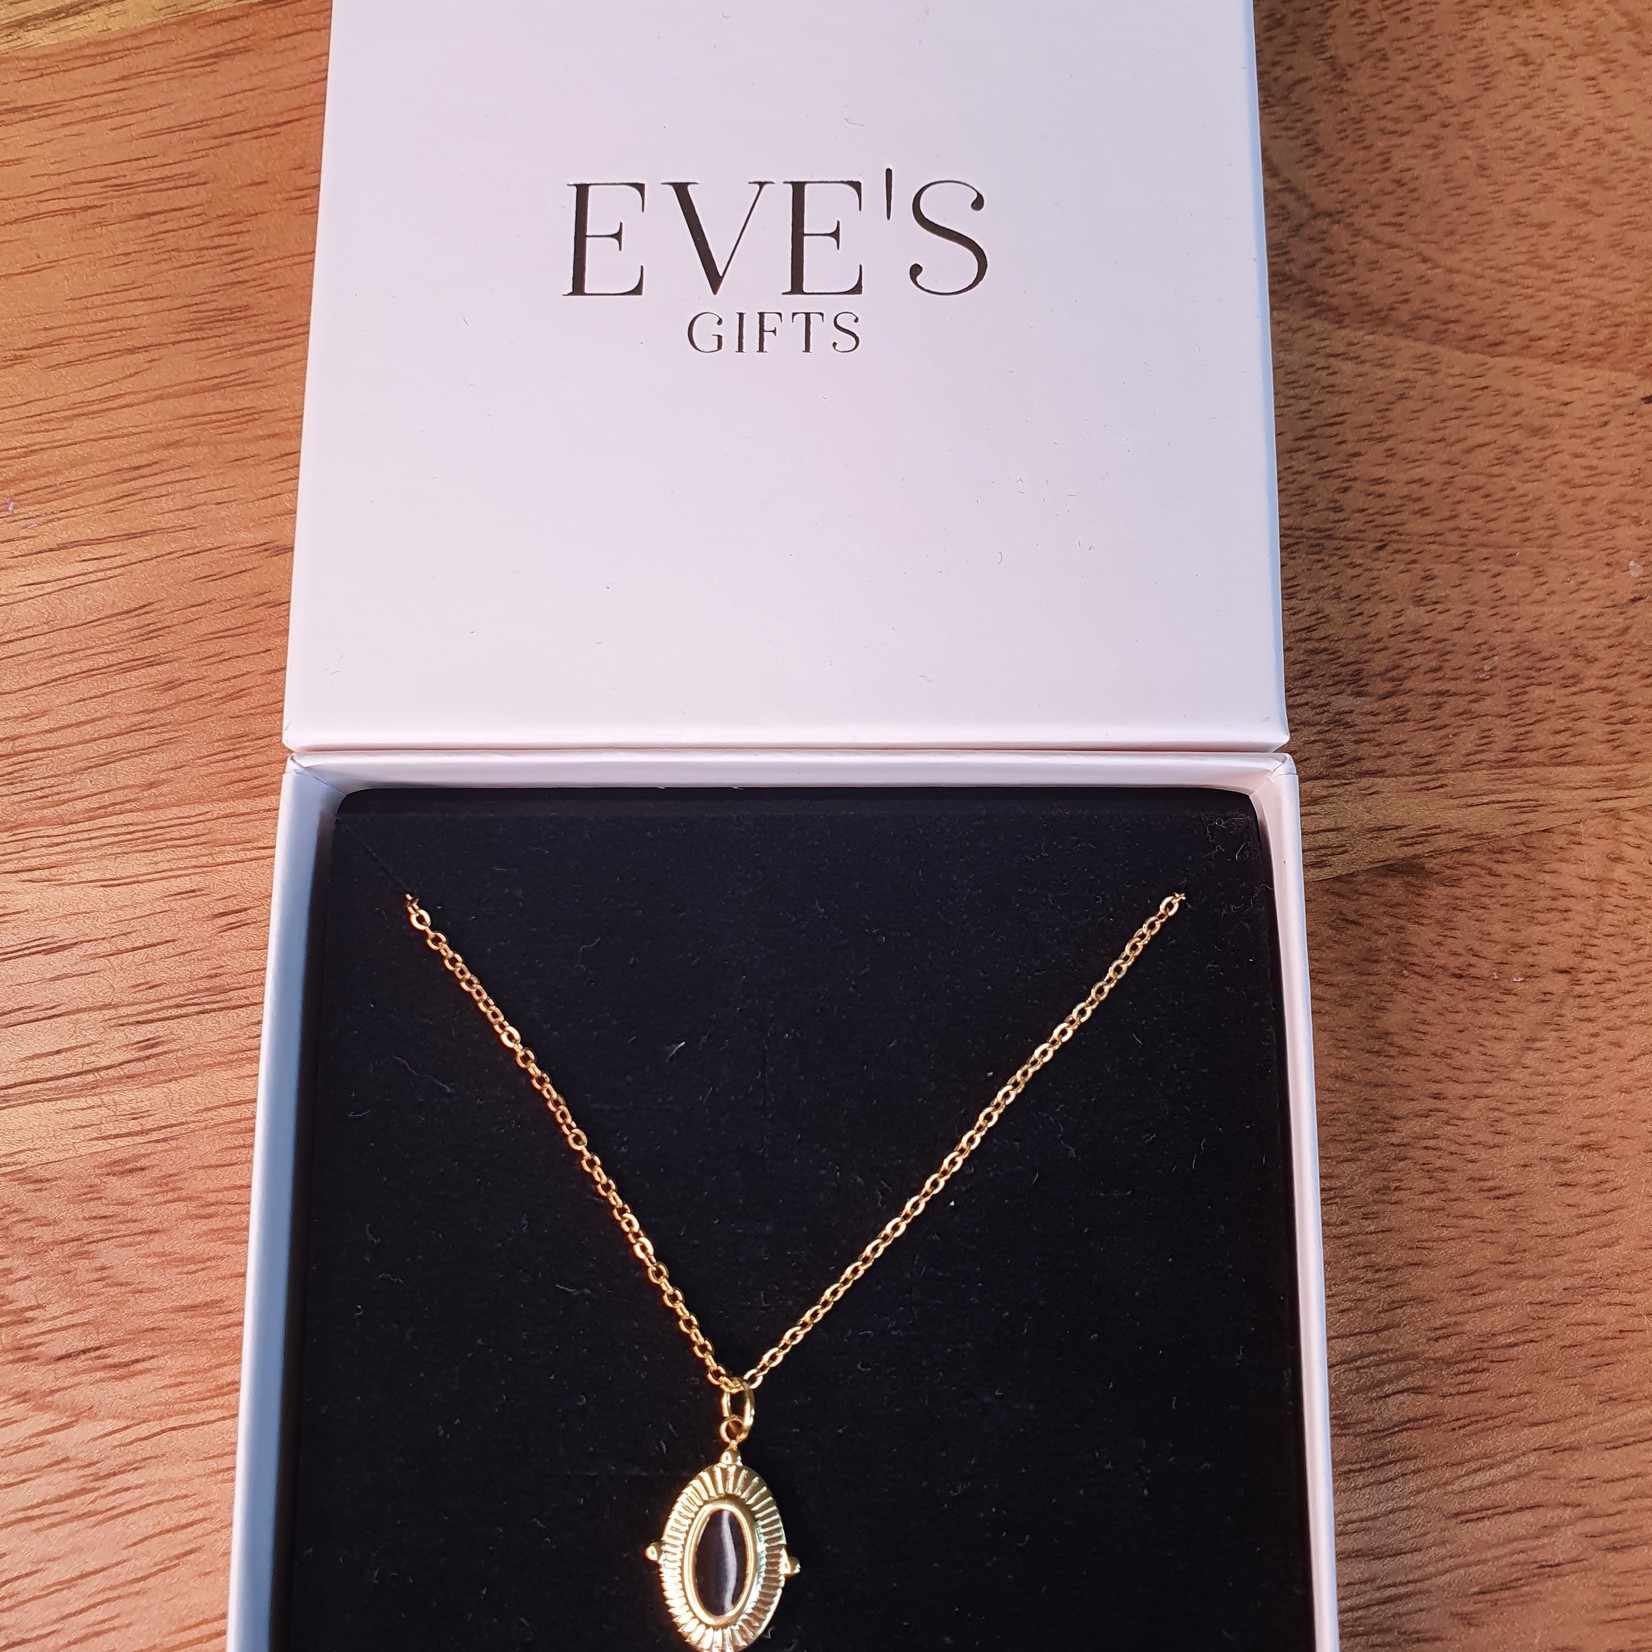 Eve's Gifts 14k gold plated necklace with black stone